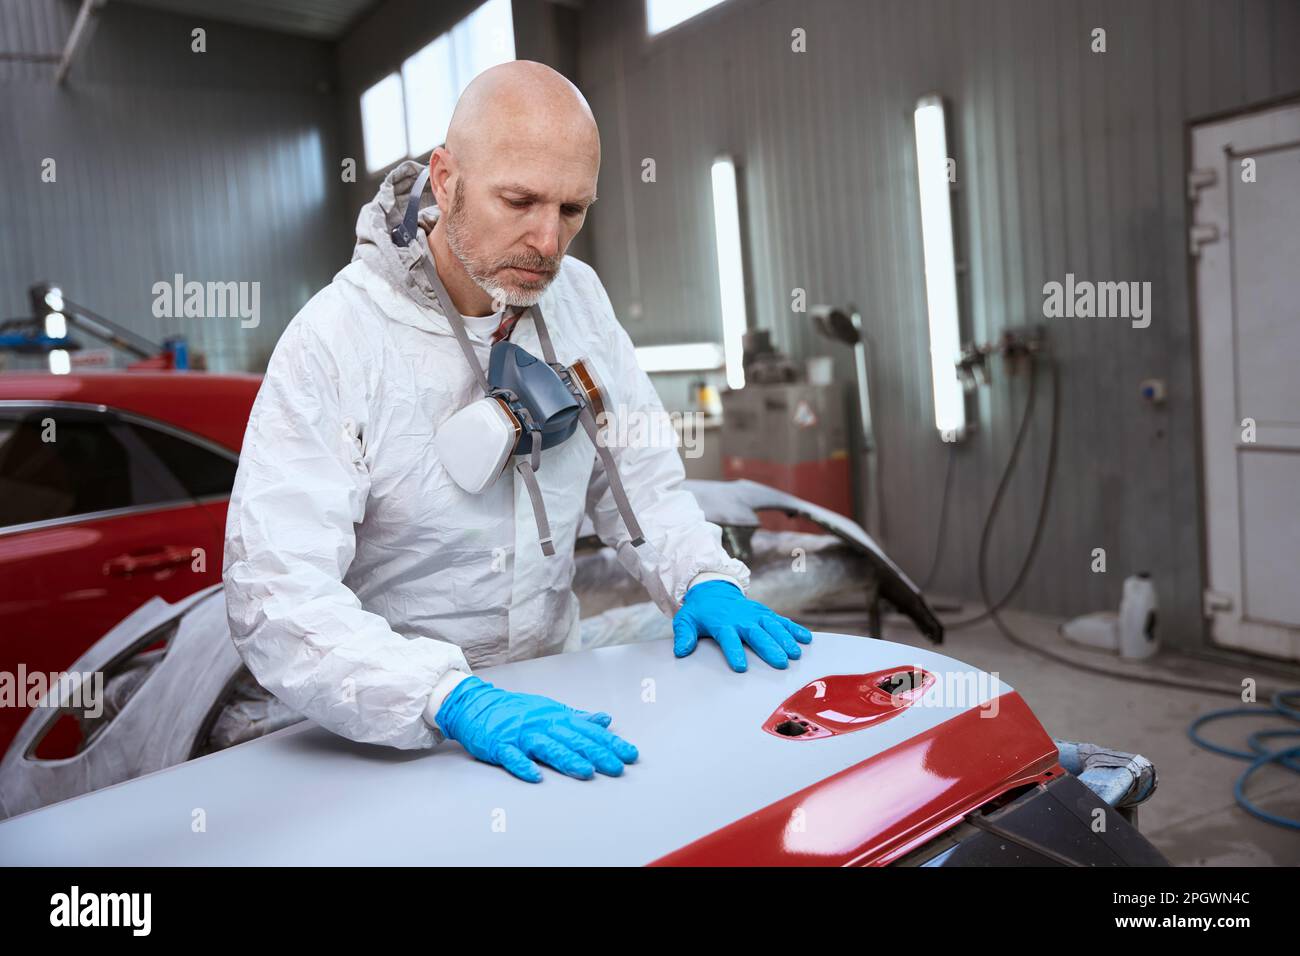 Auto repair shop worker working with unpainted car bumper Stock Photo